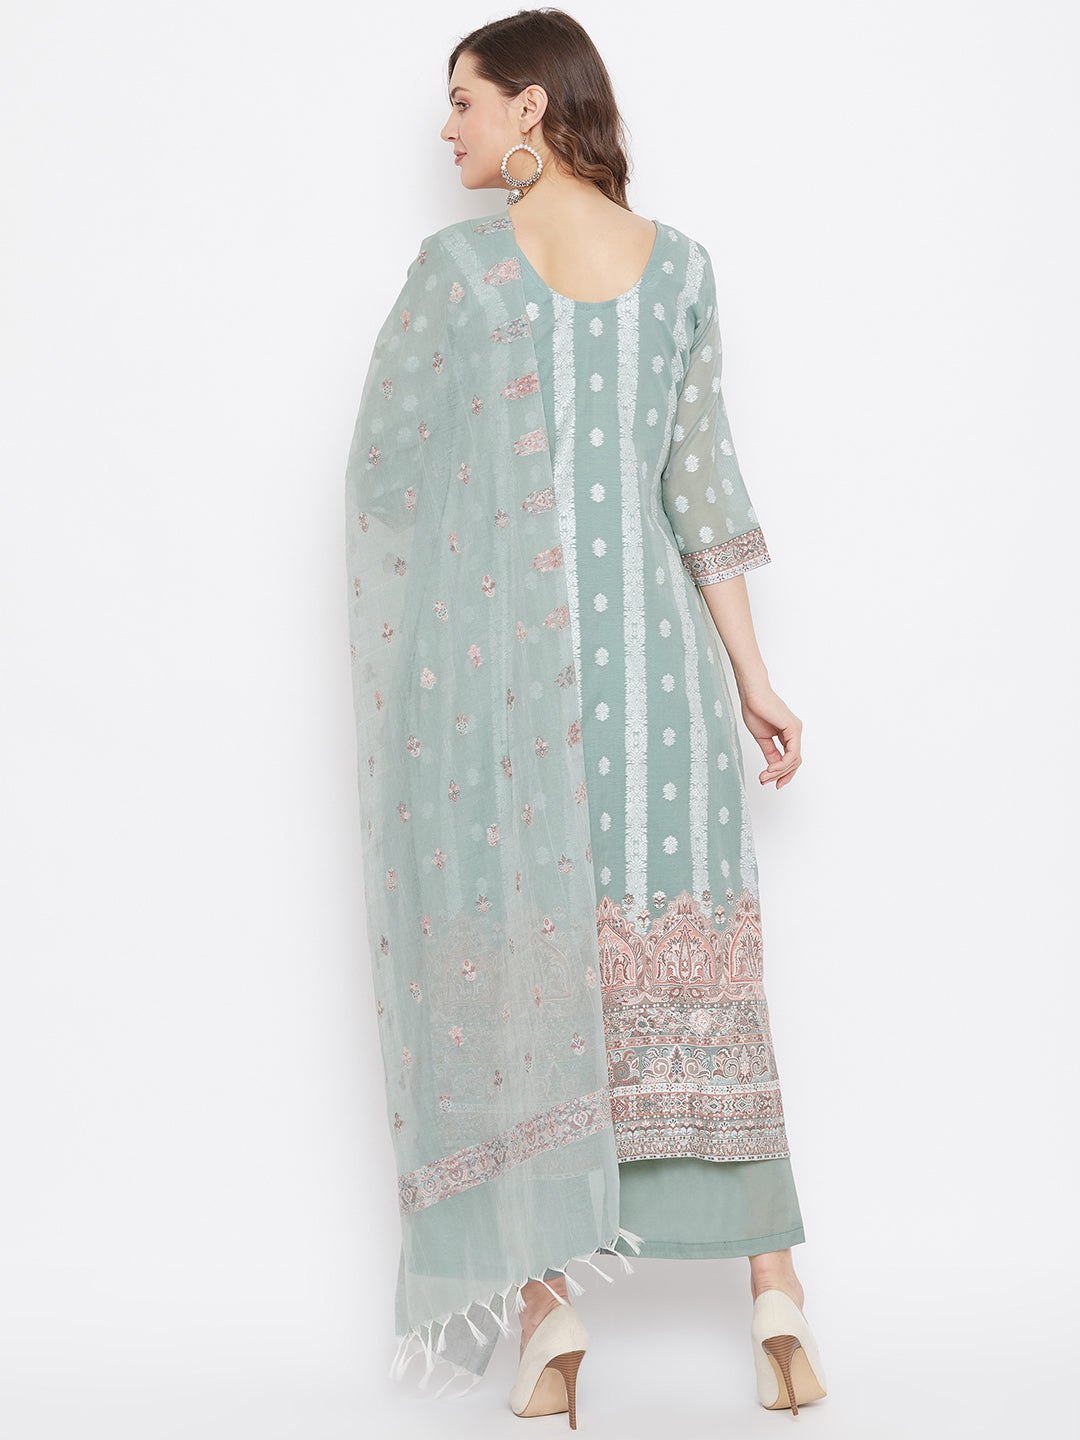 ORGANIC COTTON WOVEN LOLIVE DRESS MATERIAL WITH DUPATTA